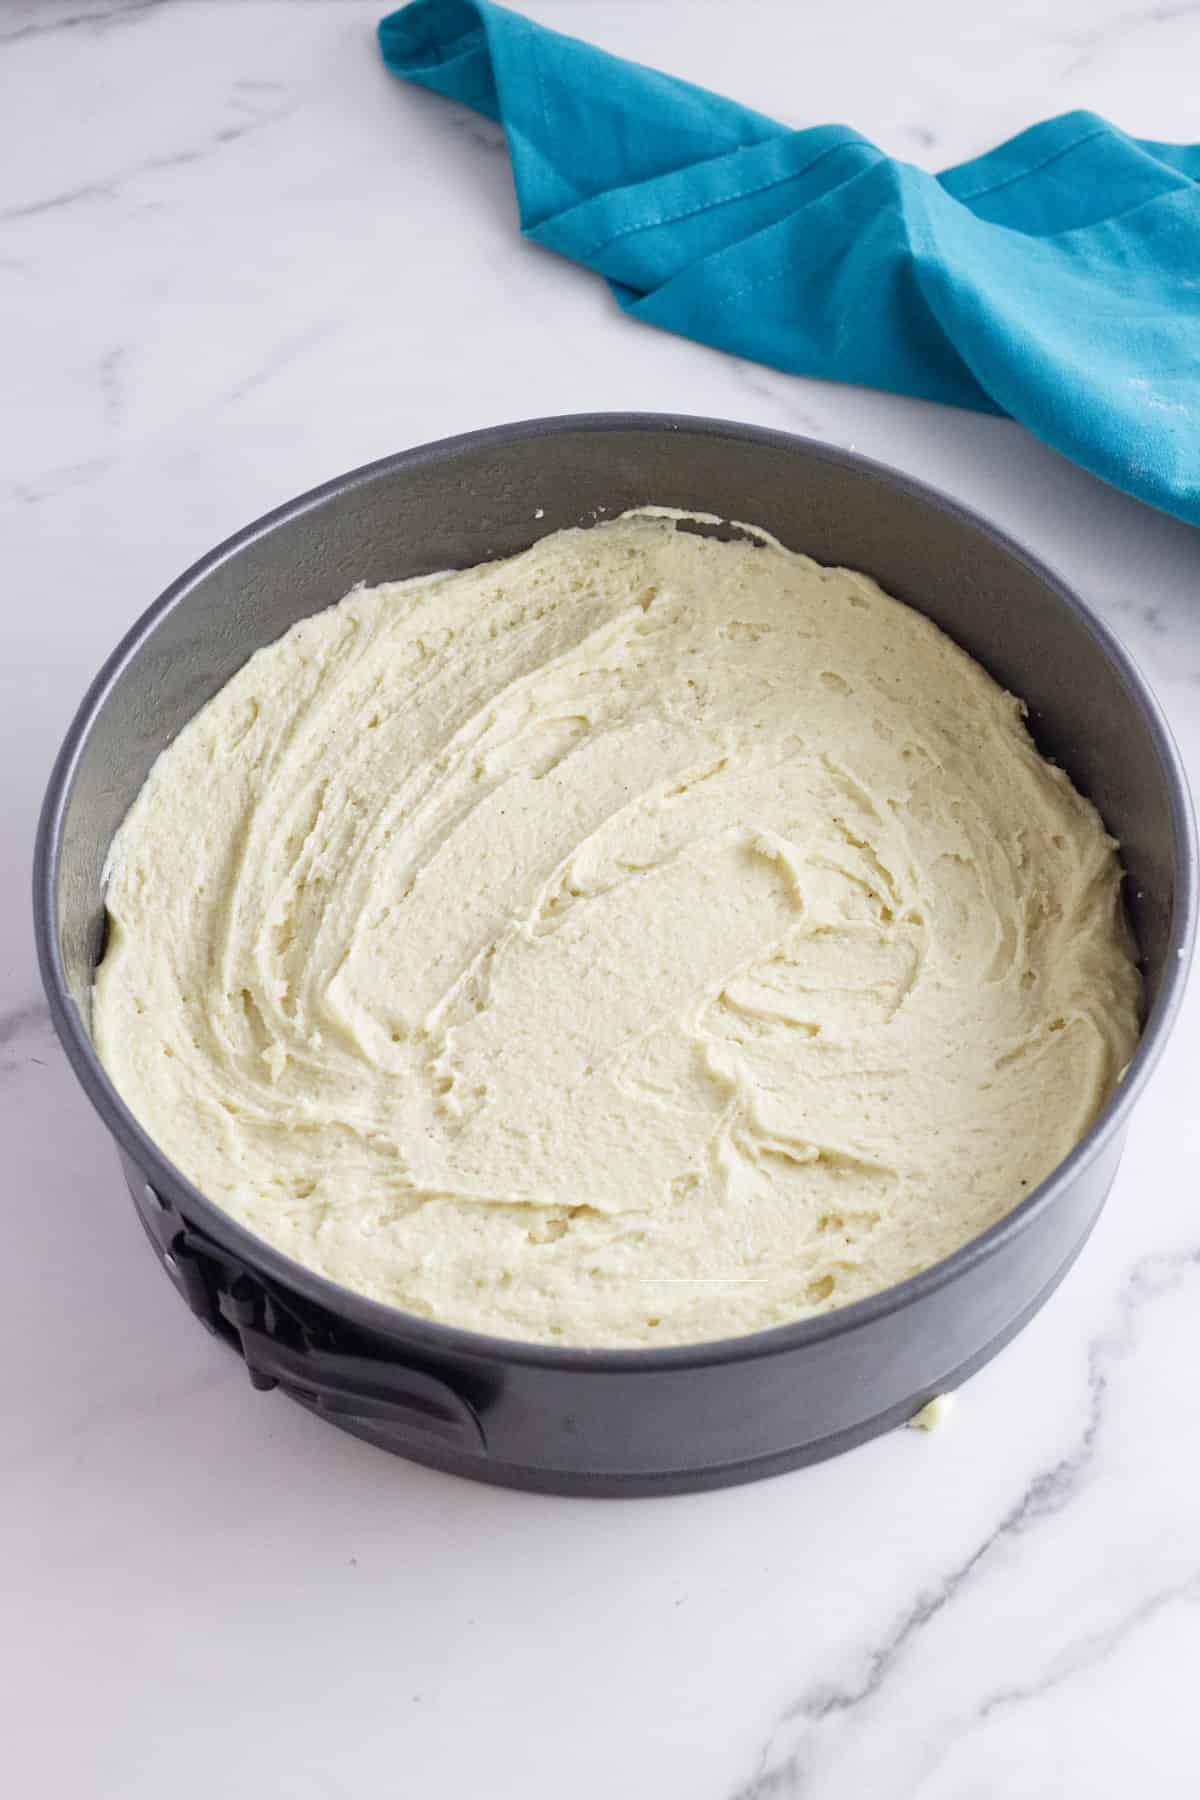 cake batter spread evenly in a pan.